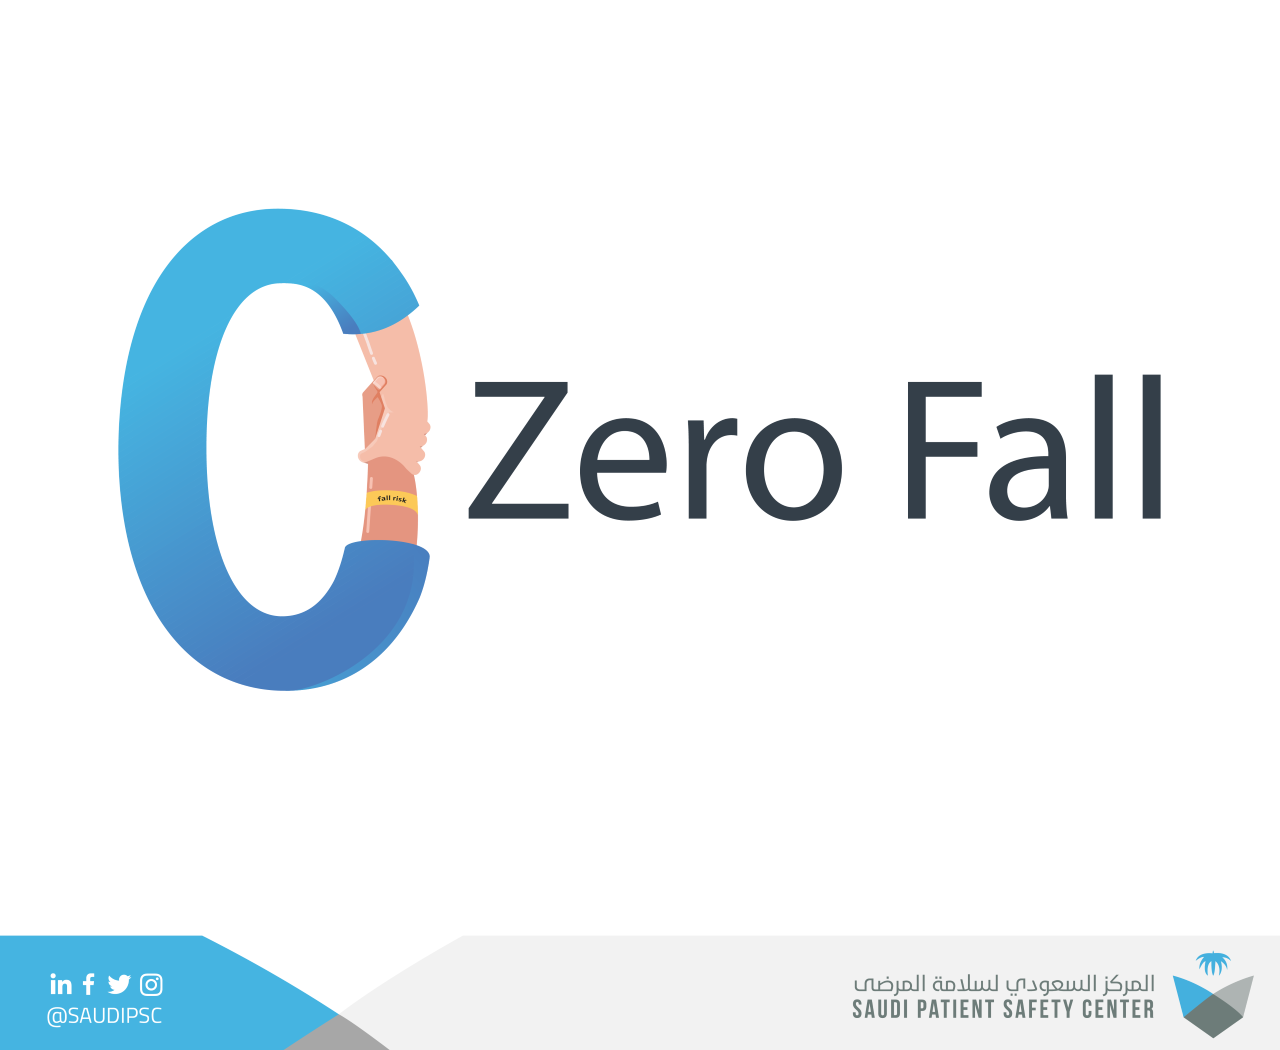 The Saudi Patient Safety Center launches the Zero Fall campaign